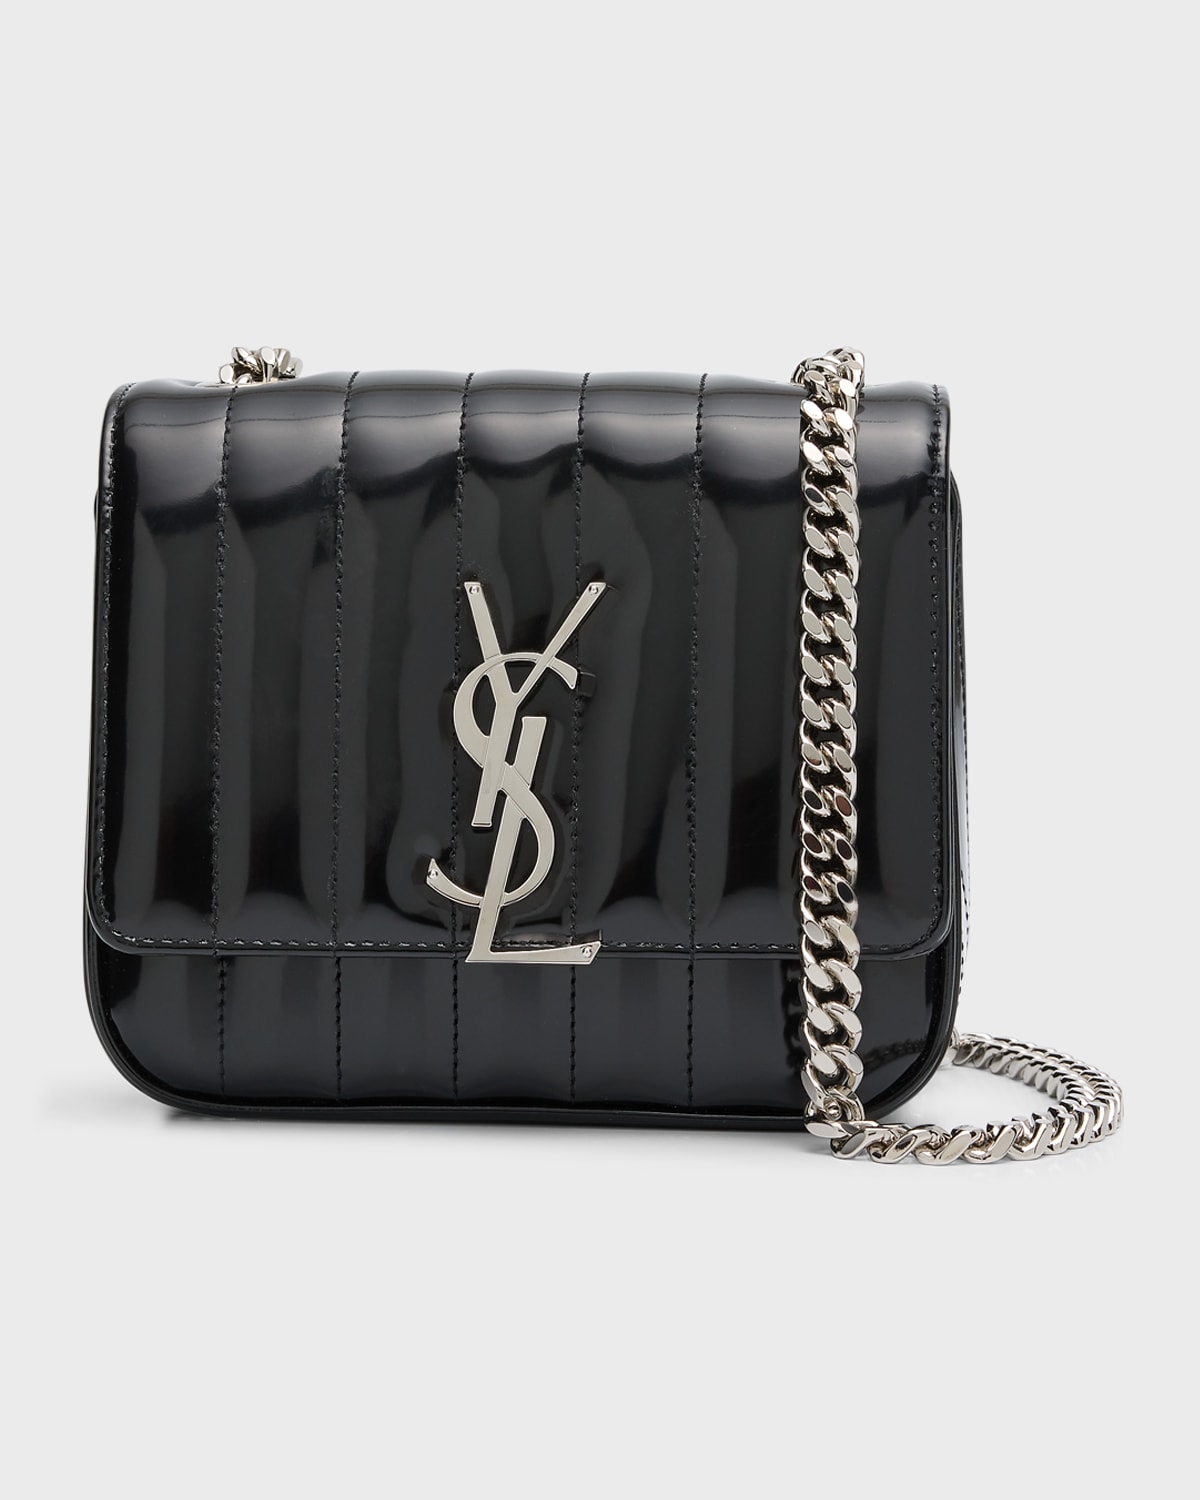 SAINT LAURENT VICKY SMALL QUILTED PATENT CHAIN SHOULDER BAG